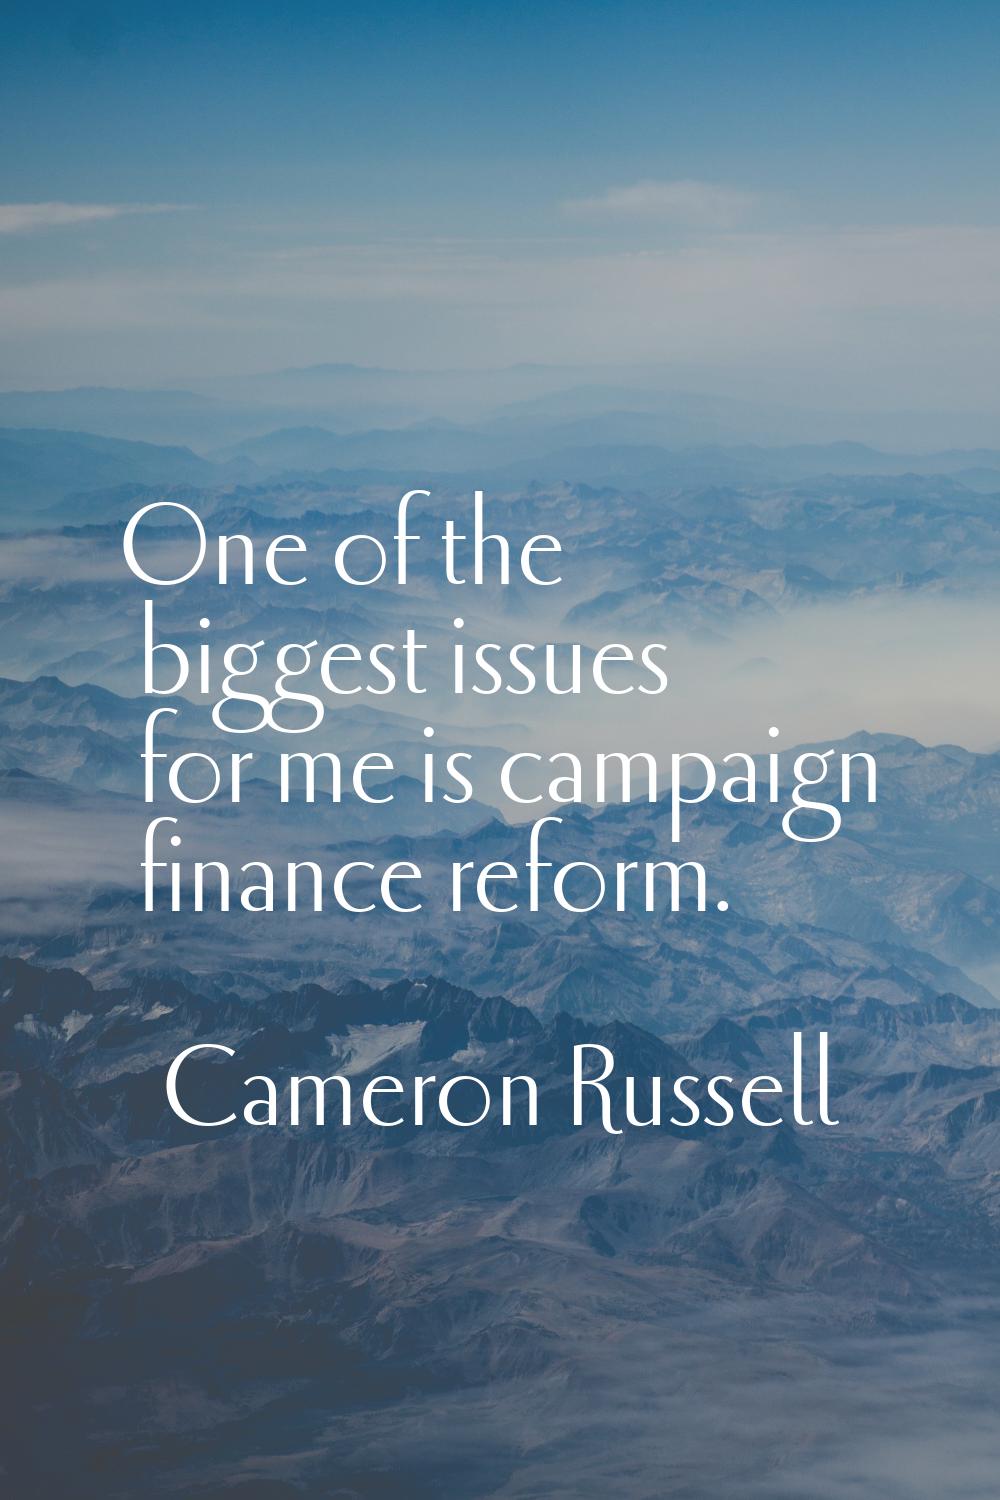 One of the biggest issues for me is campaign finance reform.